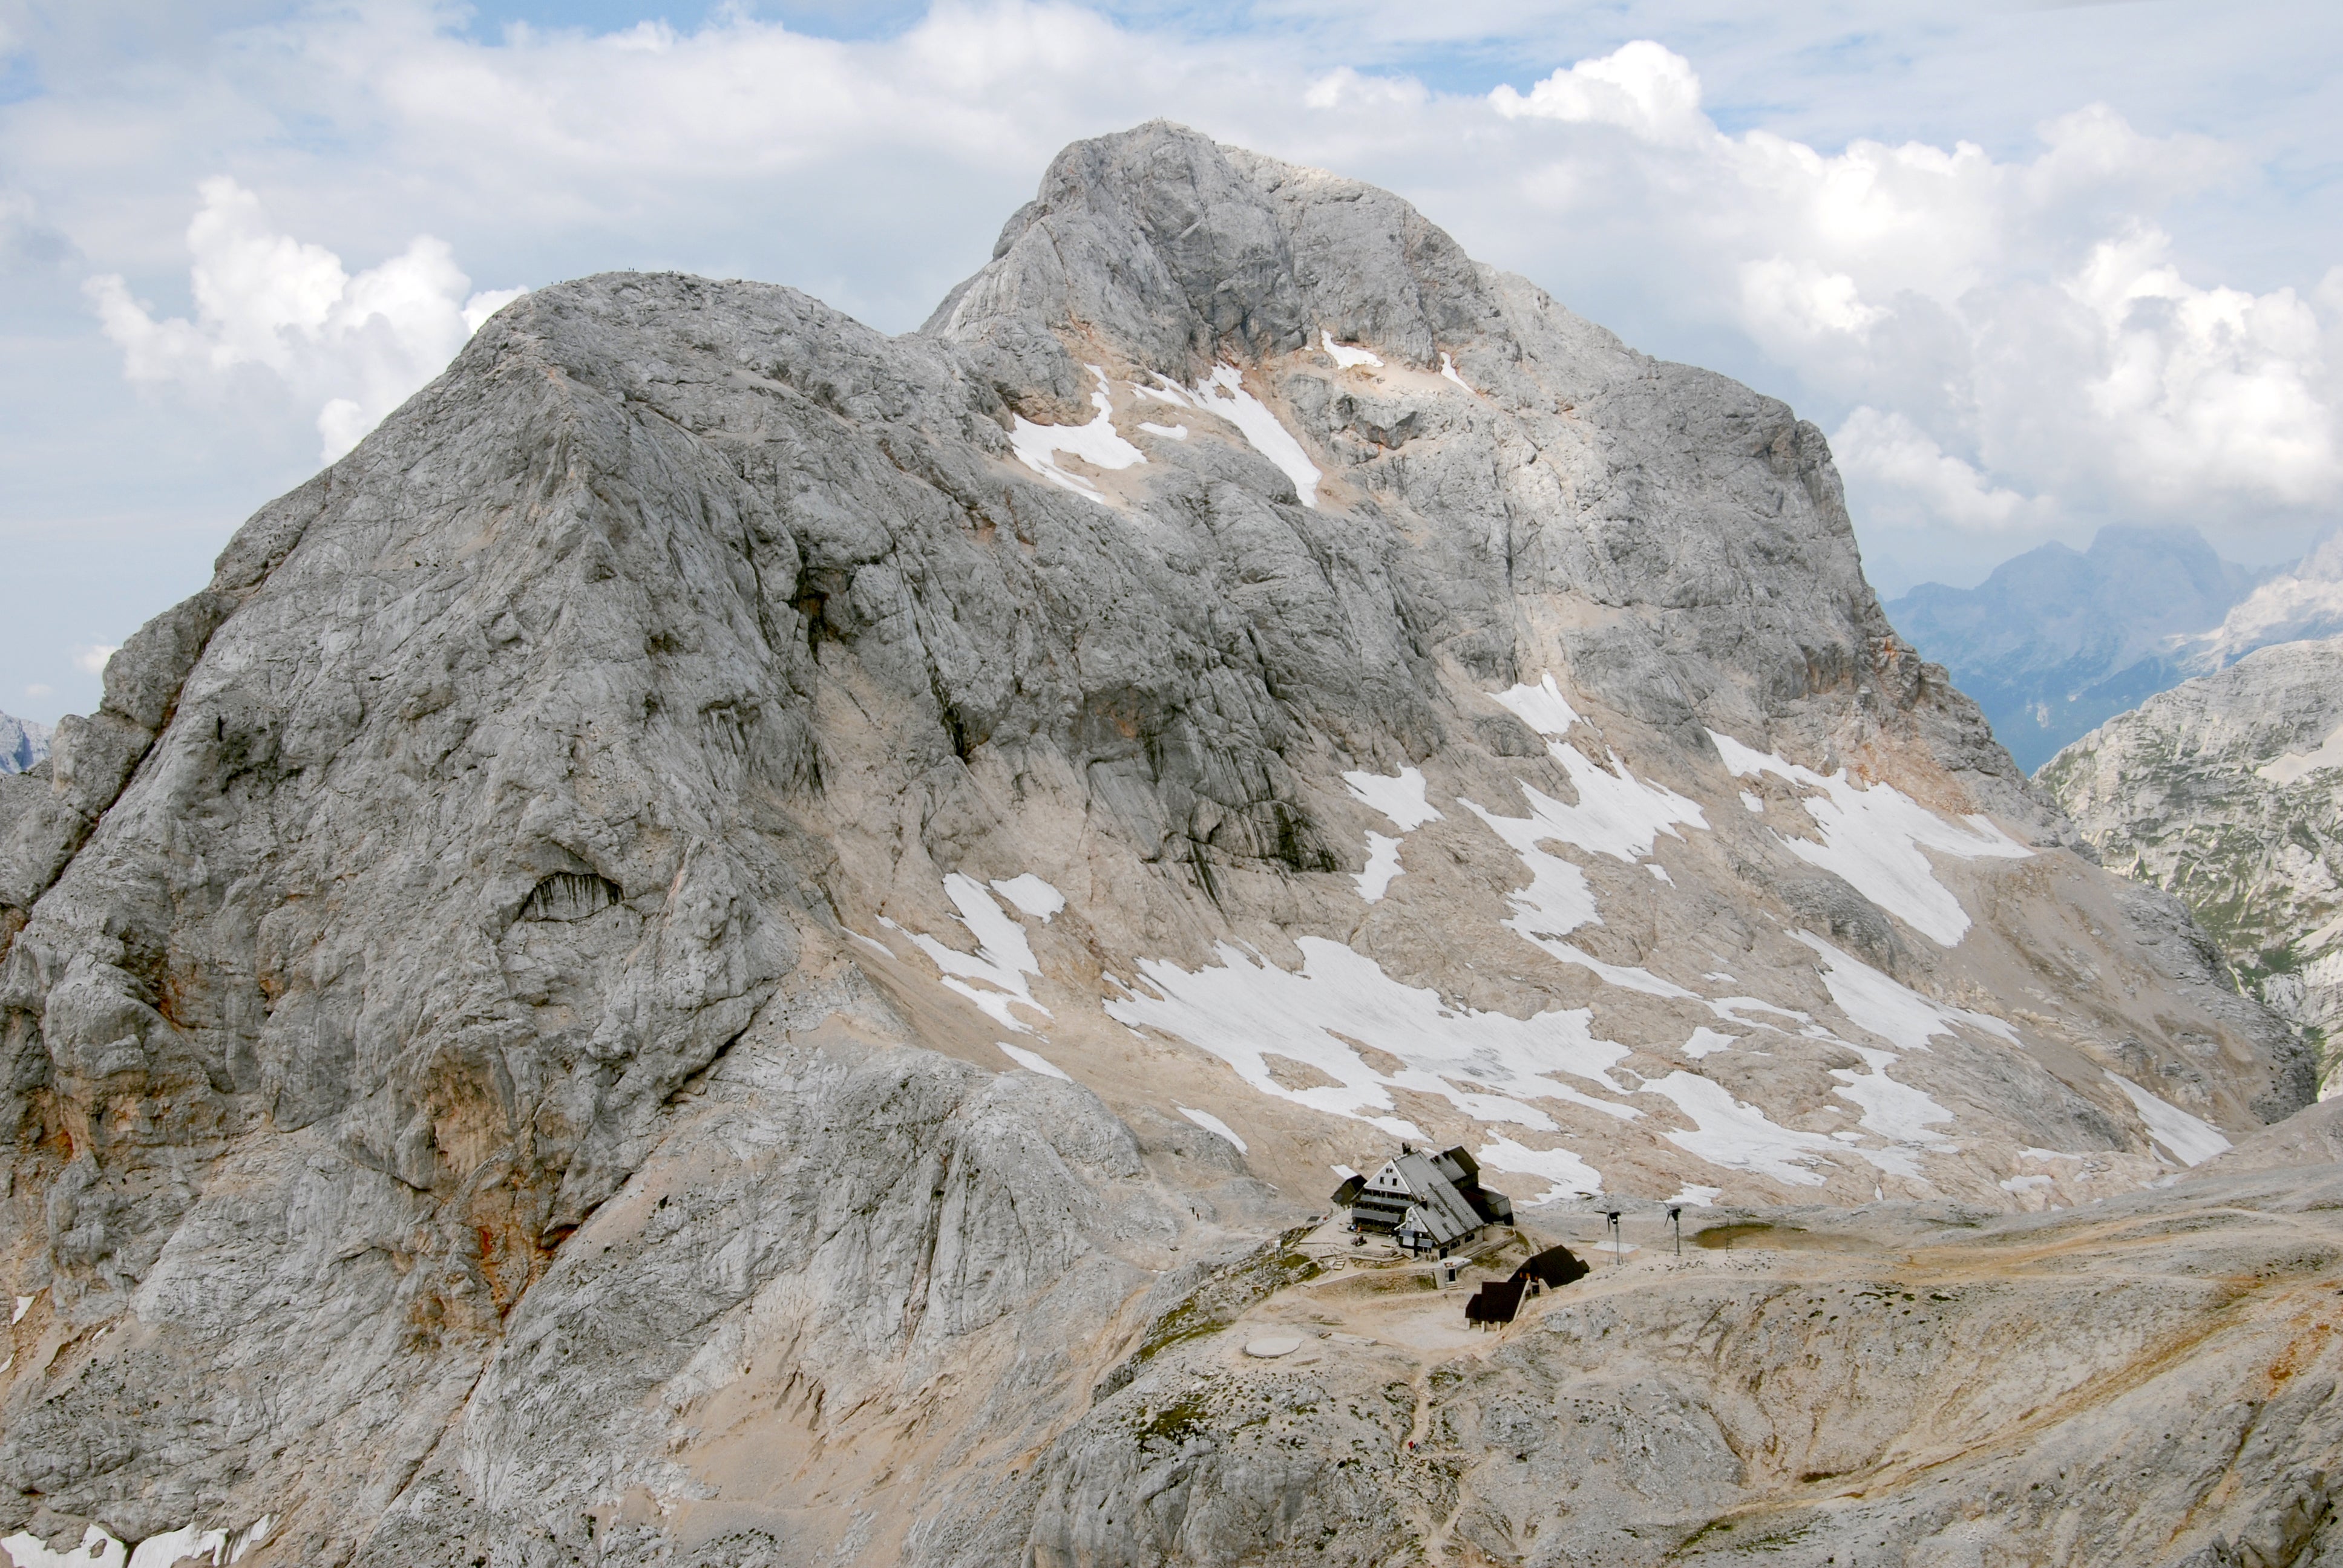 Aerial photograph of the summit of Triglav, Slovenia. The Triglav Lodge at Kredarica is seen right of center towards the lower edge of the image frame